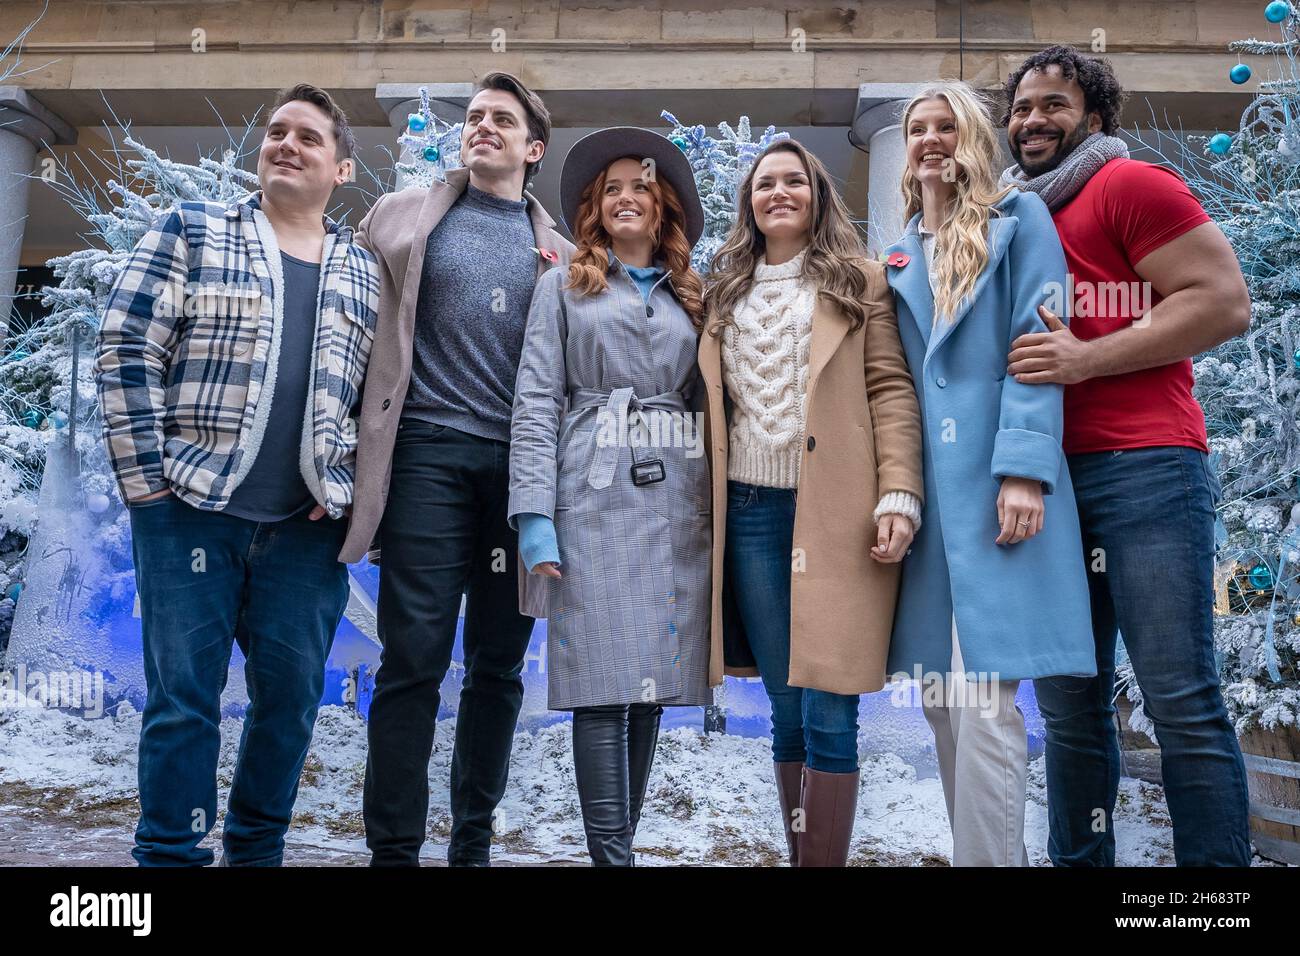 Cast of the West End theatre Disney production: ‘Frozen: The Musical’ gather in Covent Garden. London, UK. Stock Photo